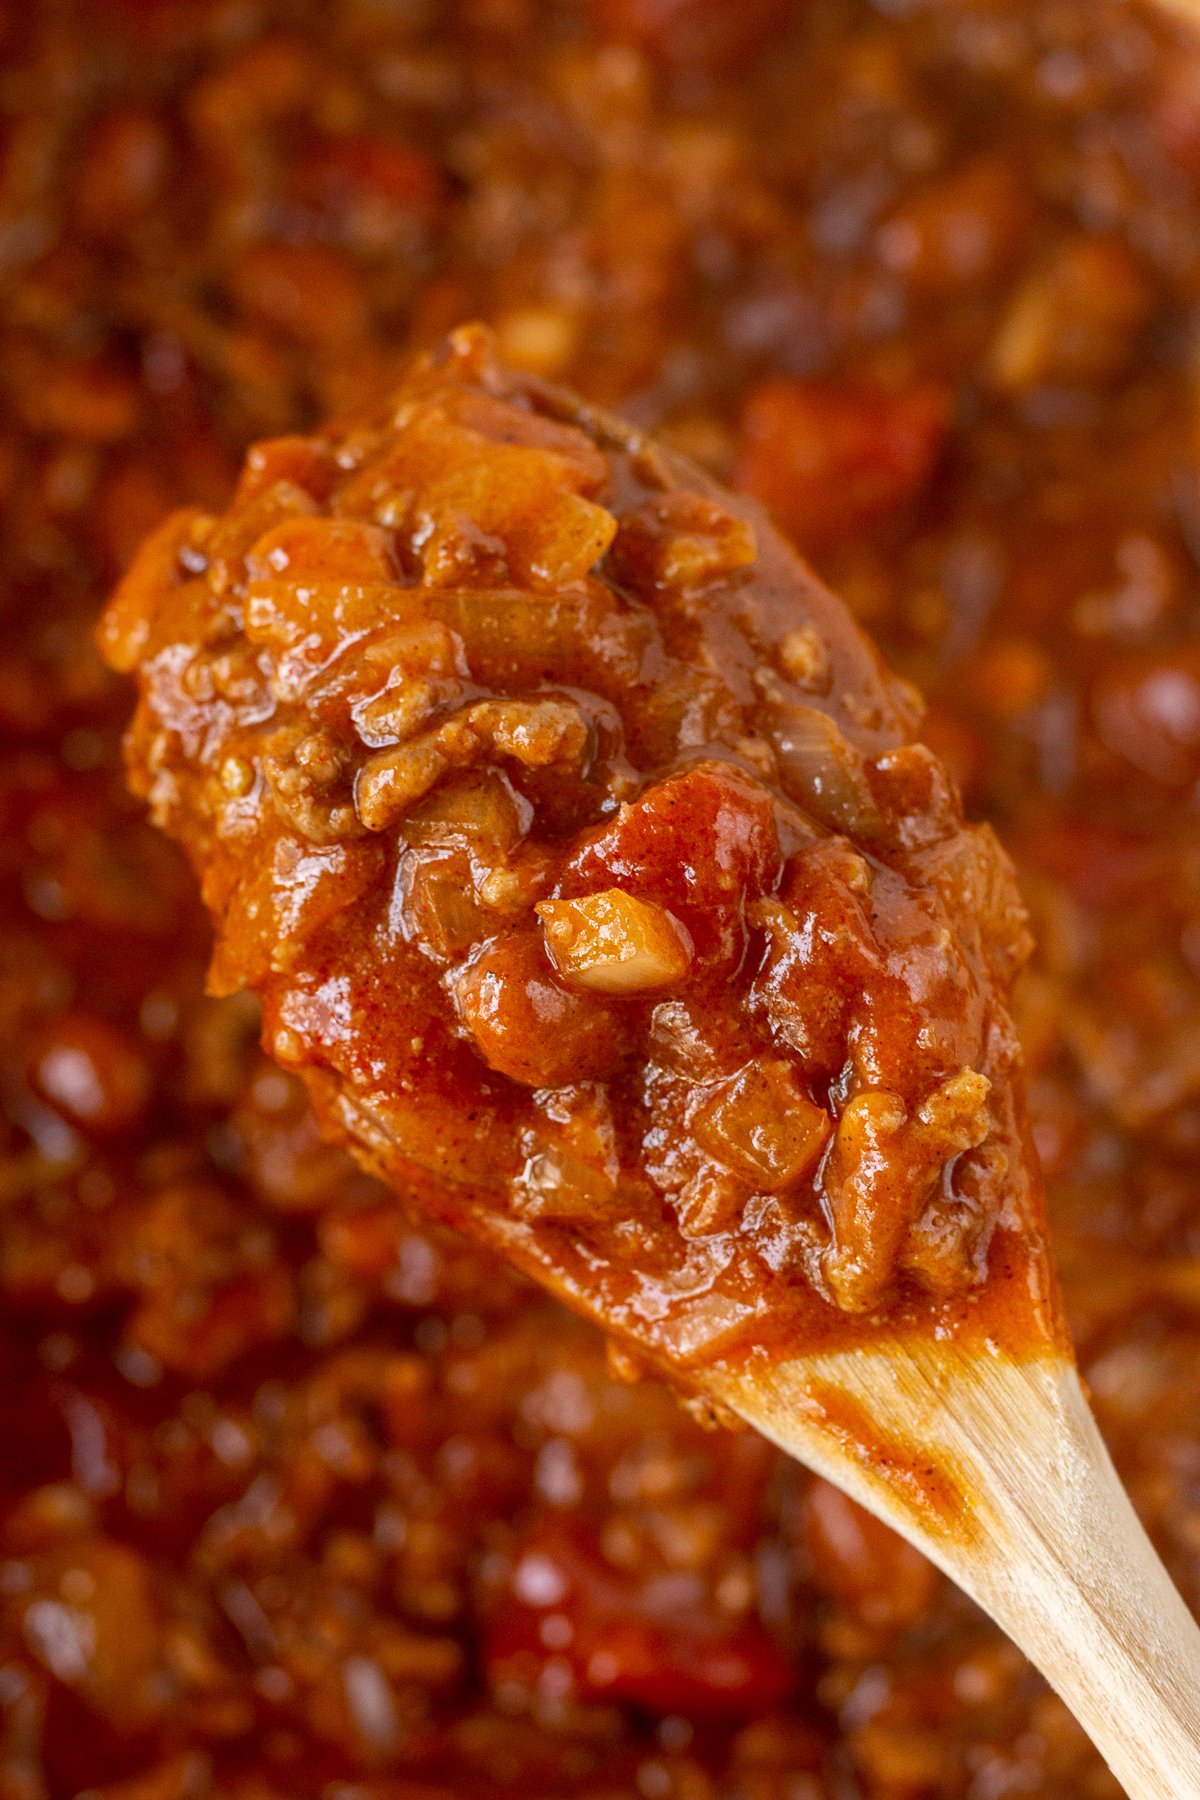 Wooden spoon filled with chili, hovering over a pot.